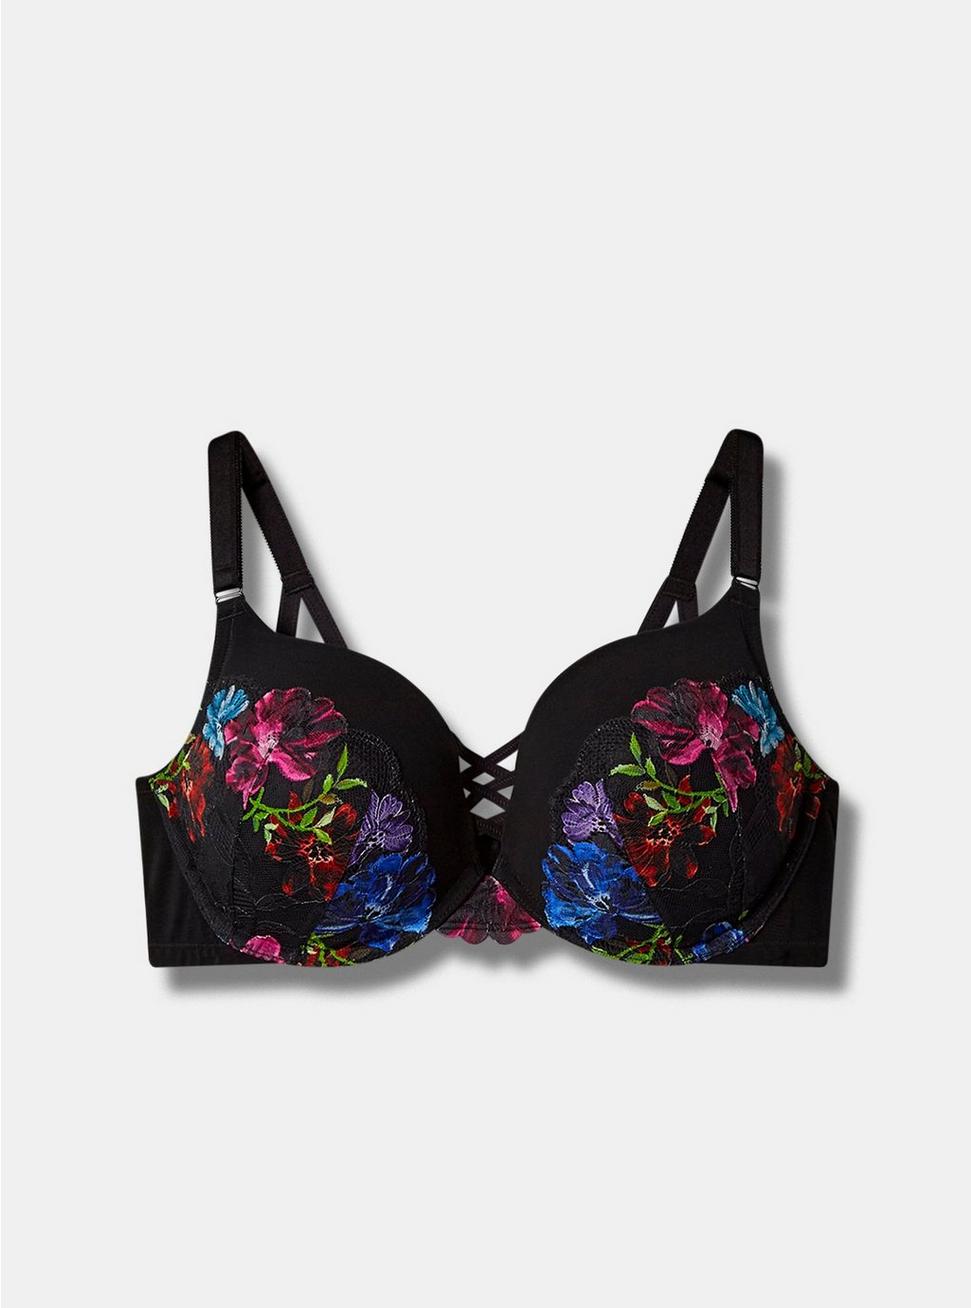 XO Plunge Push Up Photo Floral Lace 360° Back Smoothing™ Bra, PHOTO FLORAL LACE: BLACK, hi-res